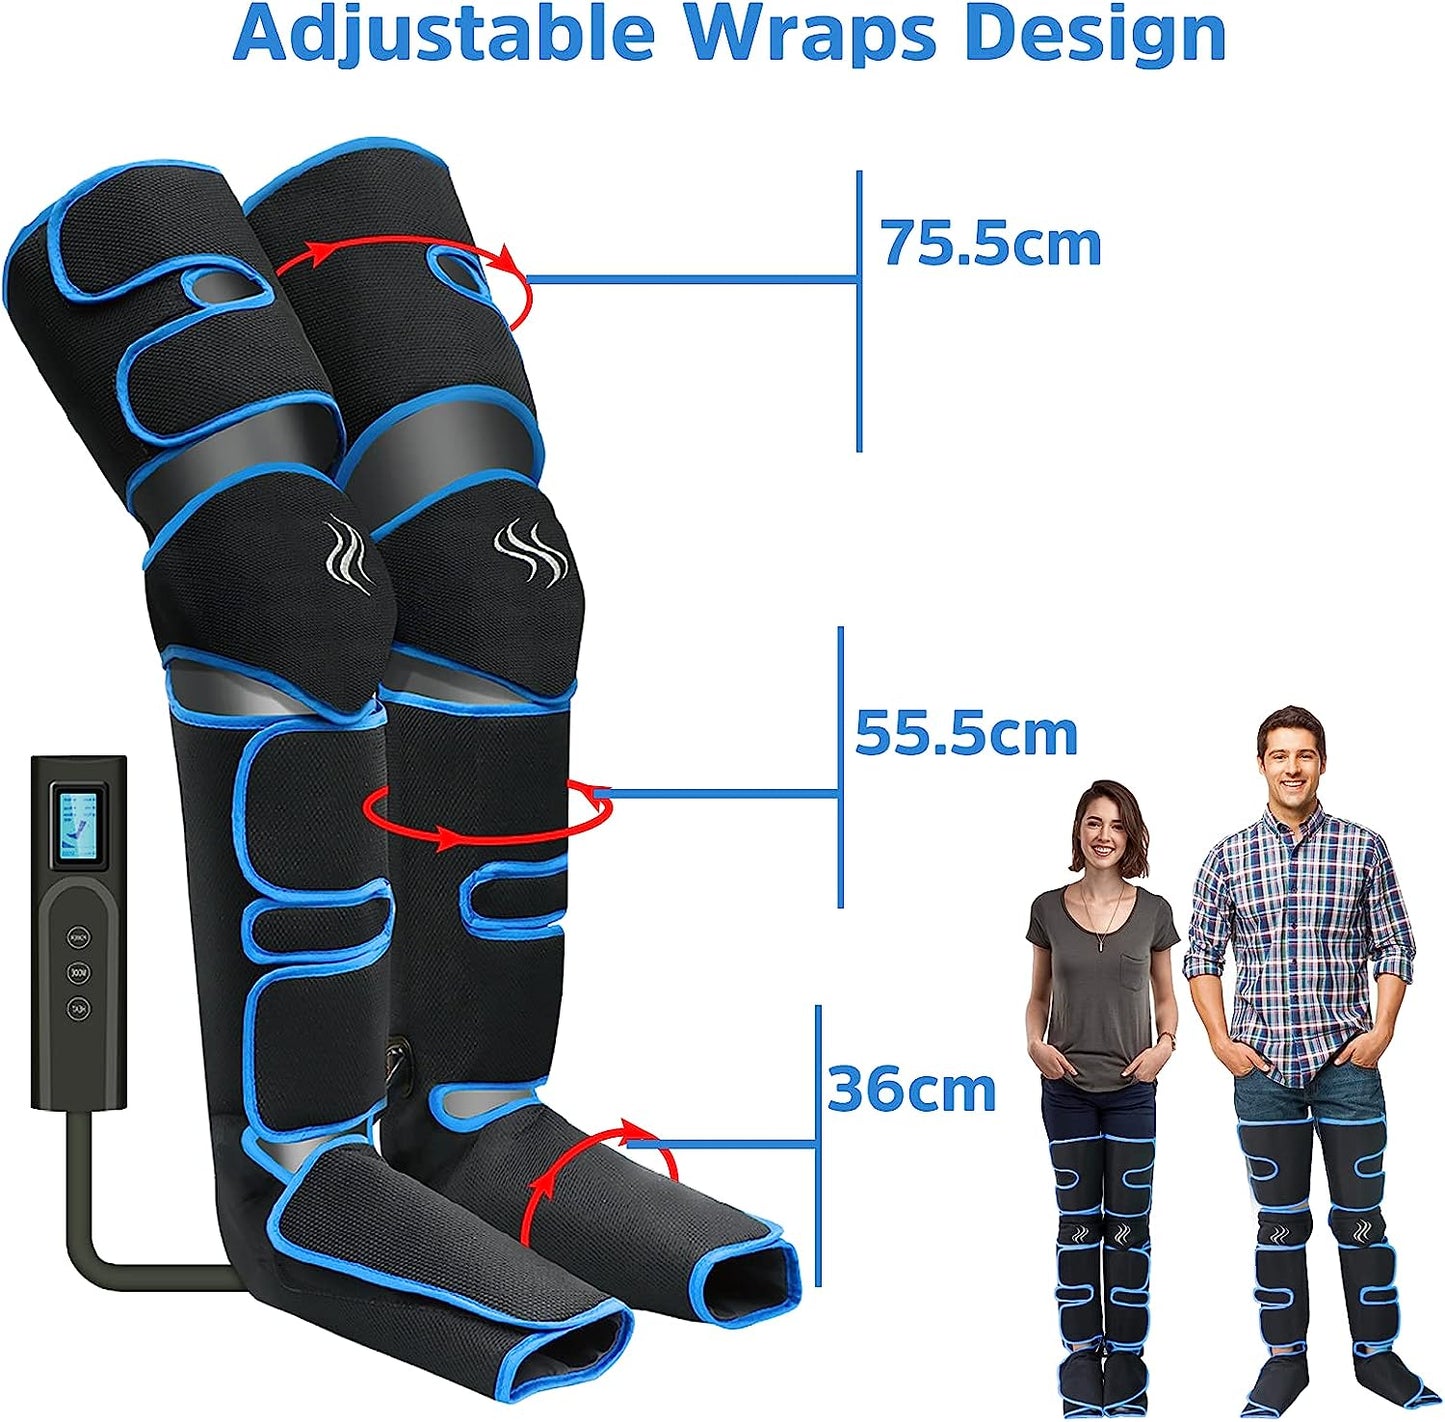 ULTIMATE Leg-Massager Compression with Knee Heating- Relieve pain in seconds